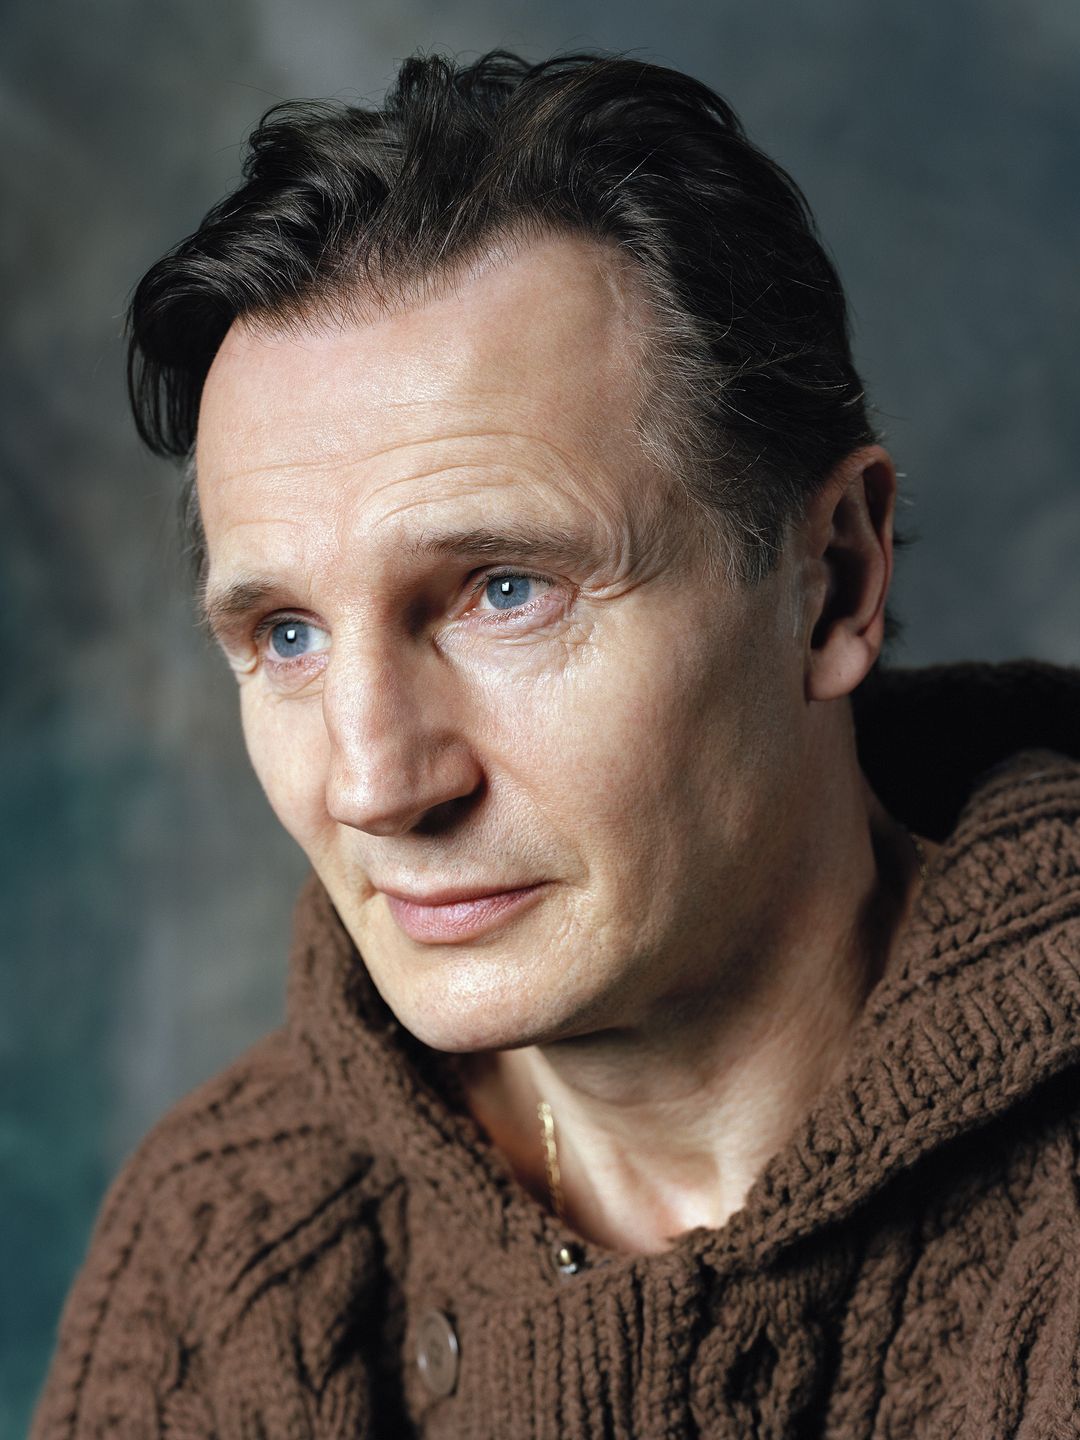 Liam Neeson young age